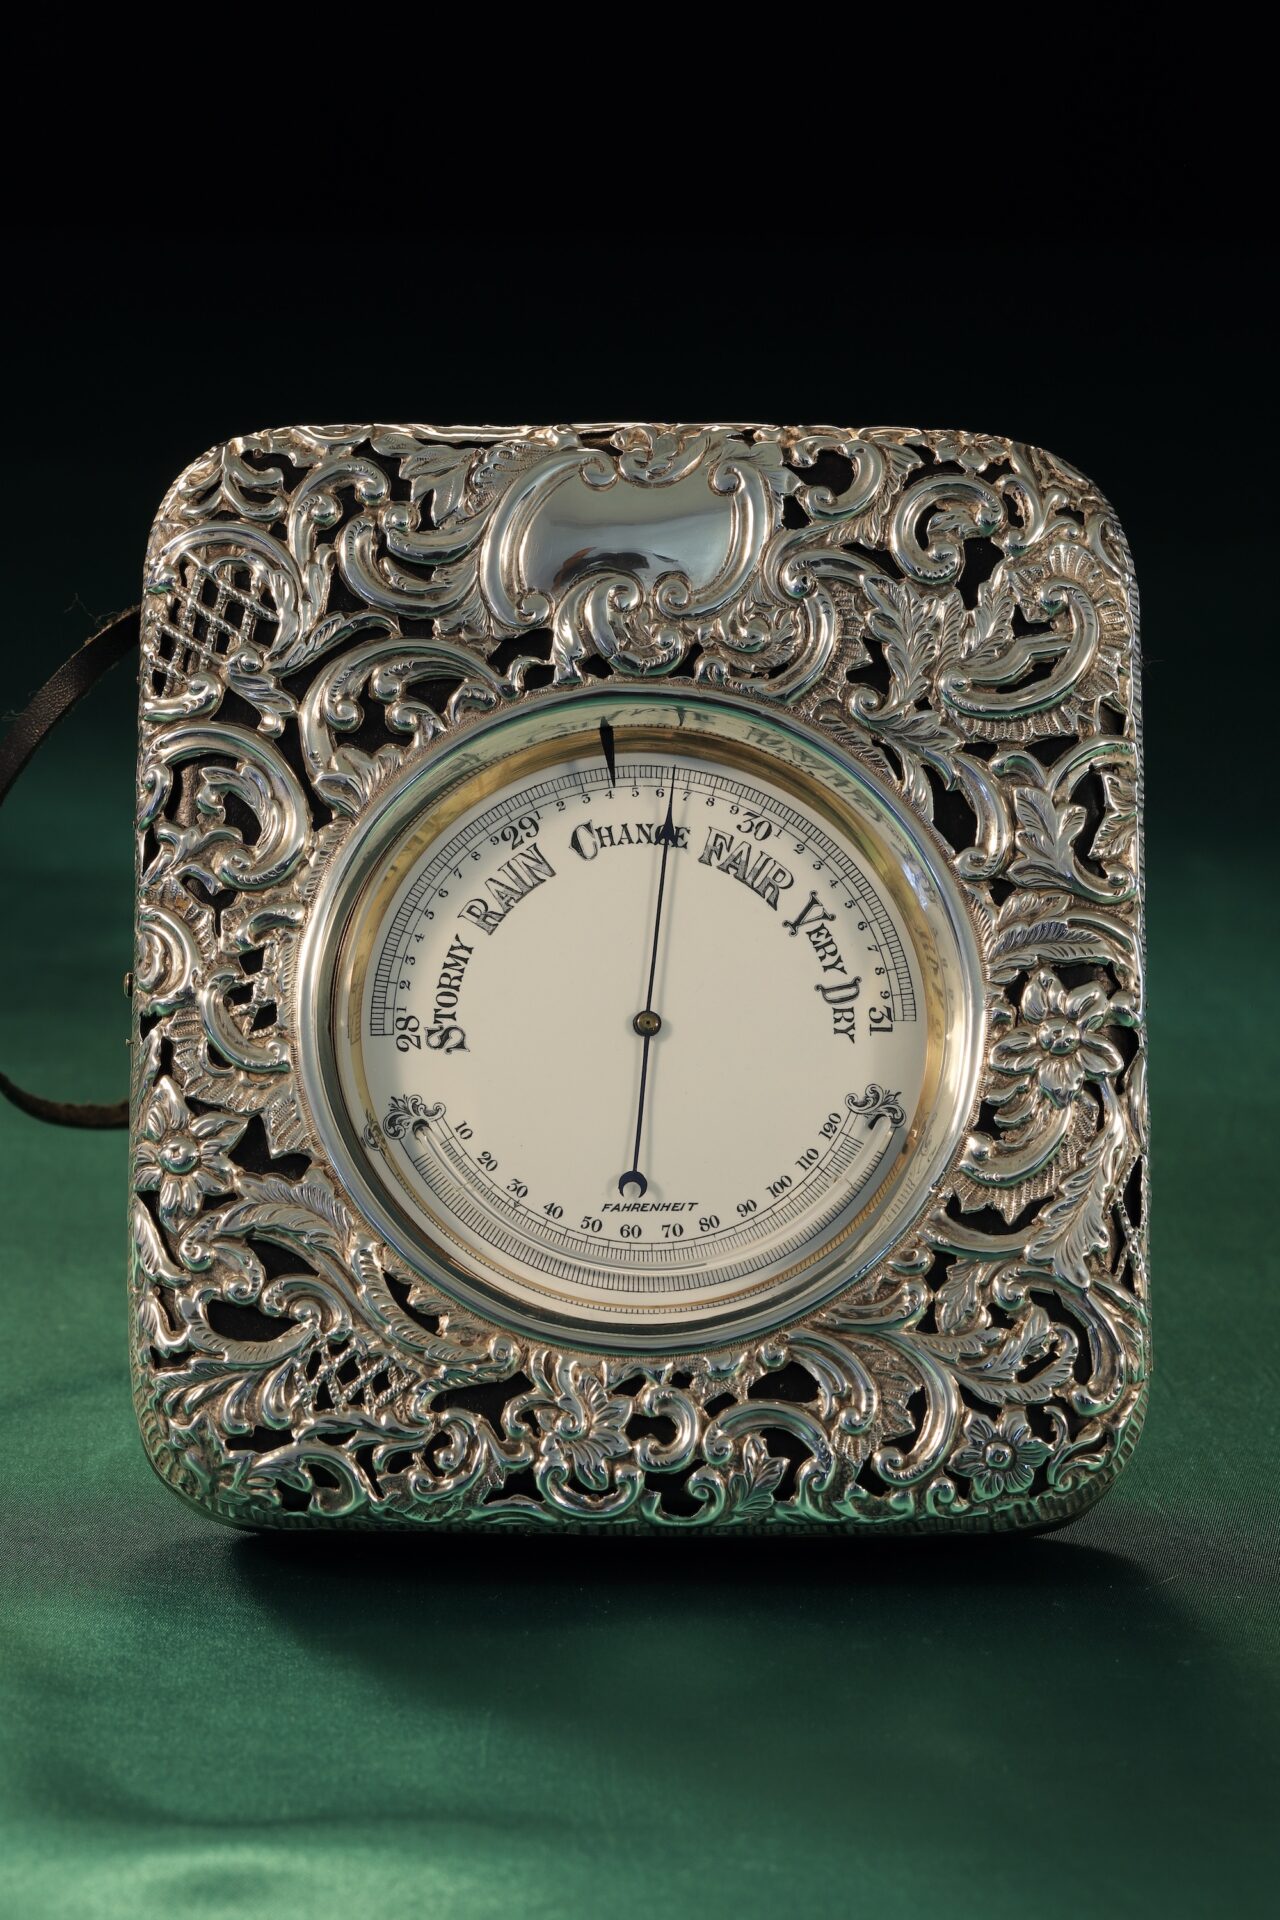 VERY LARGE SILVER FRONTED DESK BAROMETER BY HENRY MATTHEWS c1903